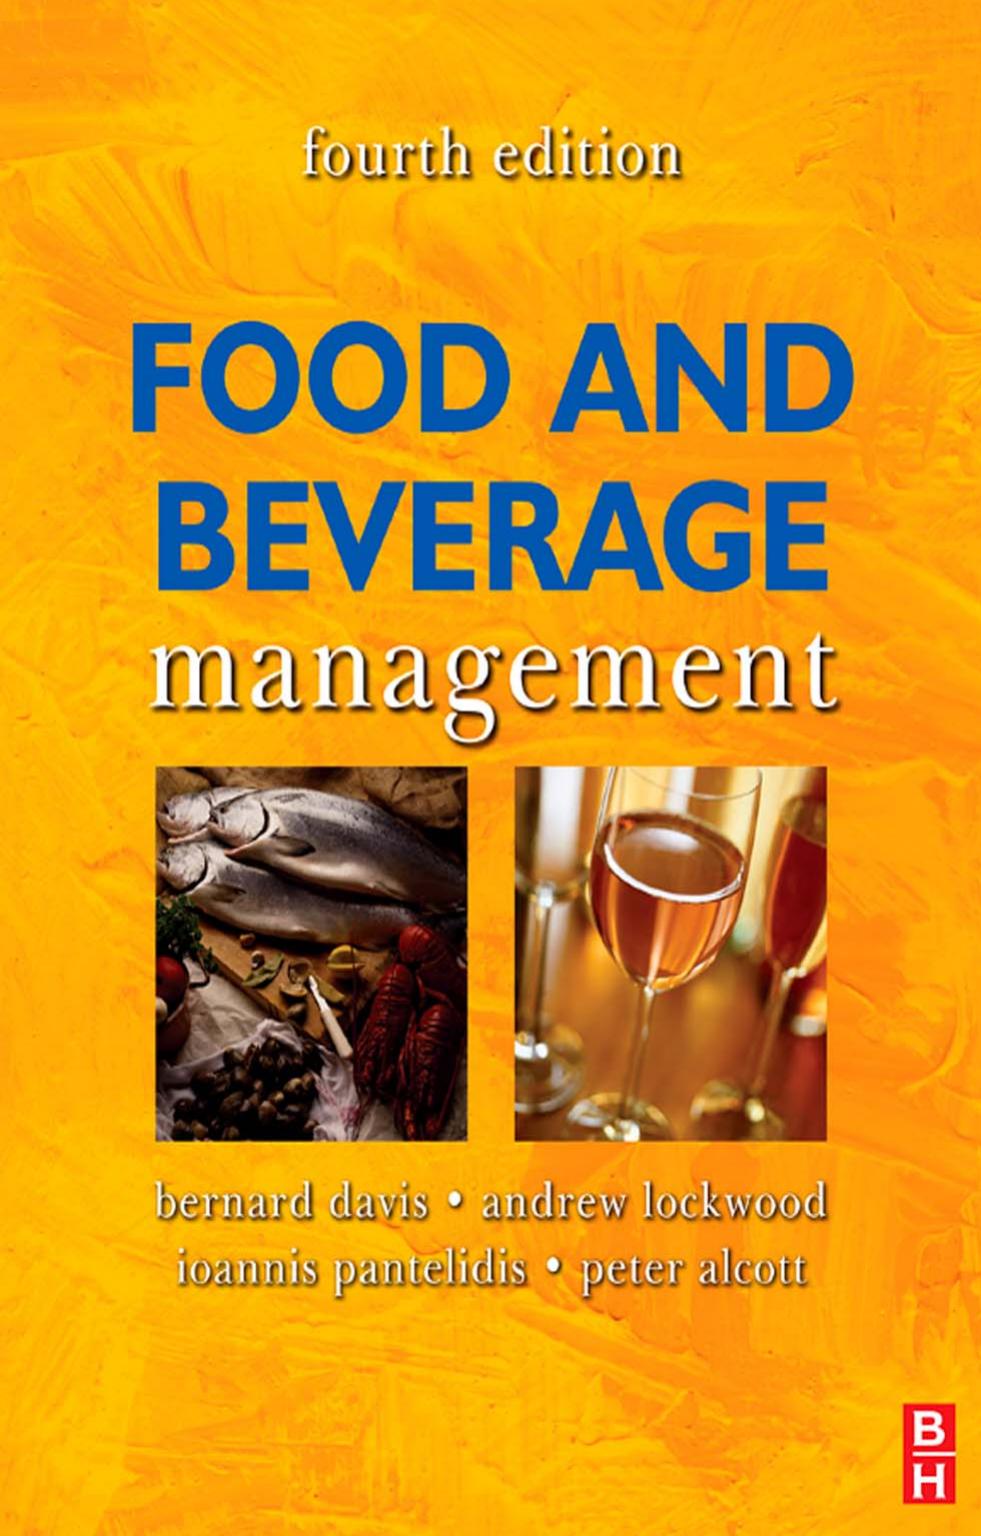 Food and Beverage Management, Fourth Edition